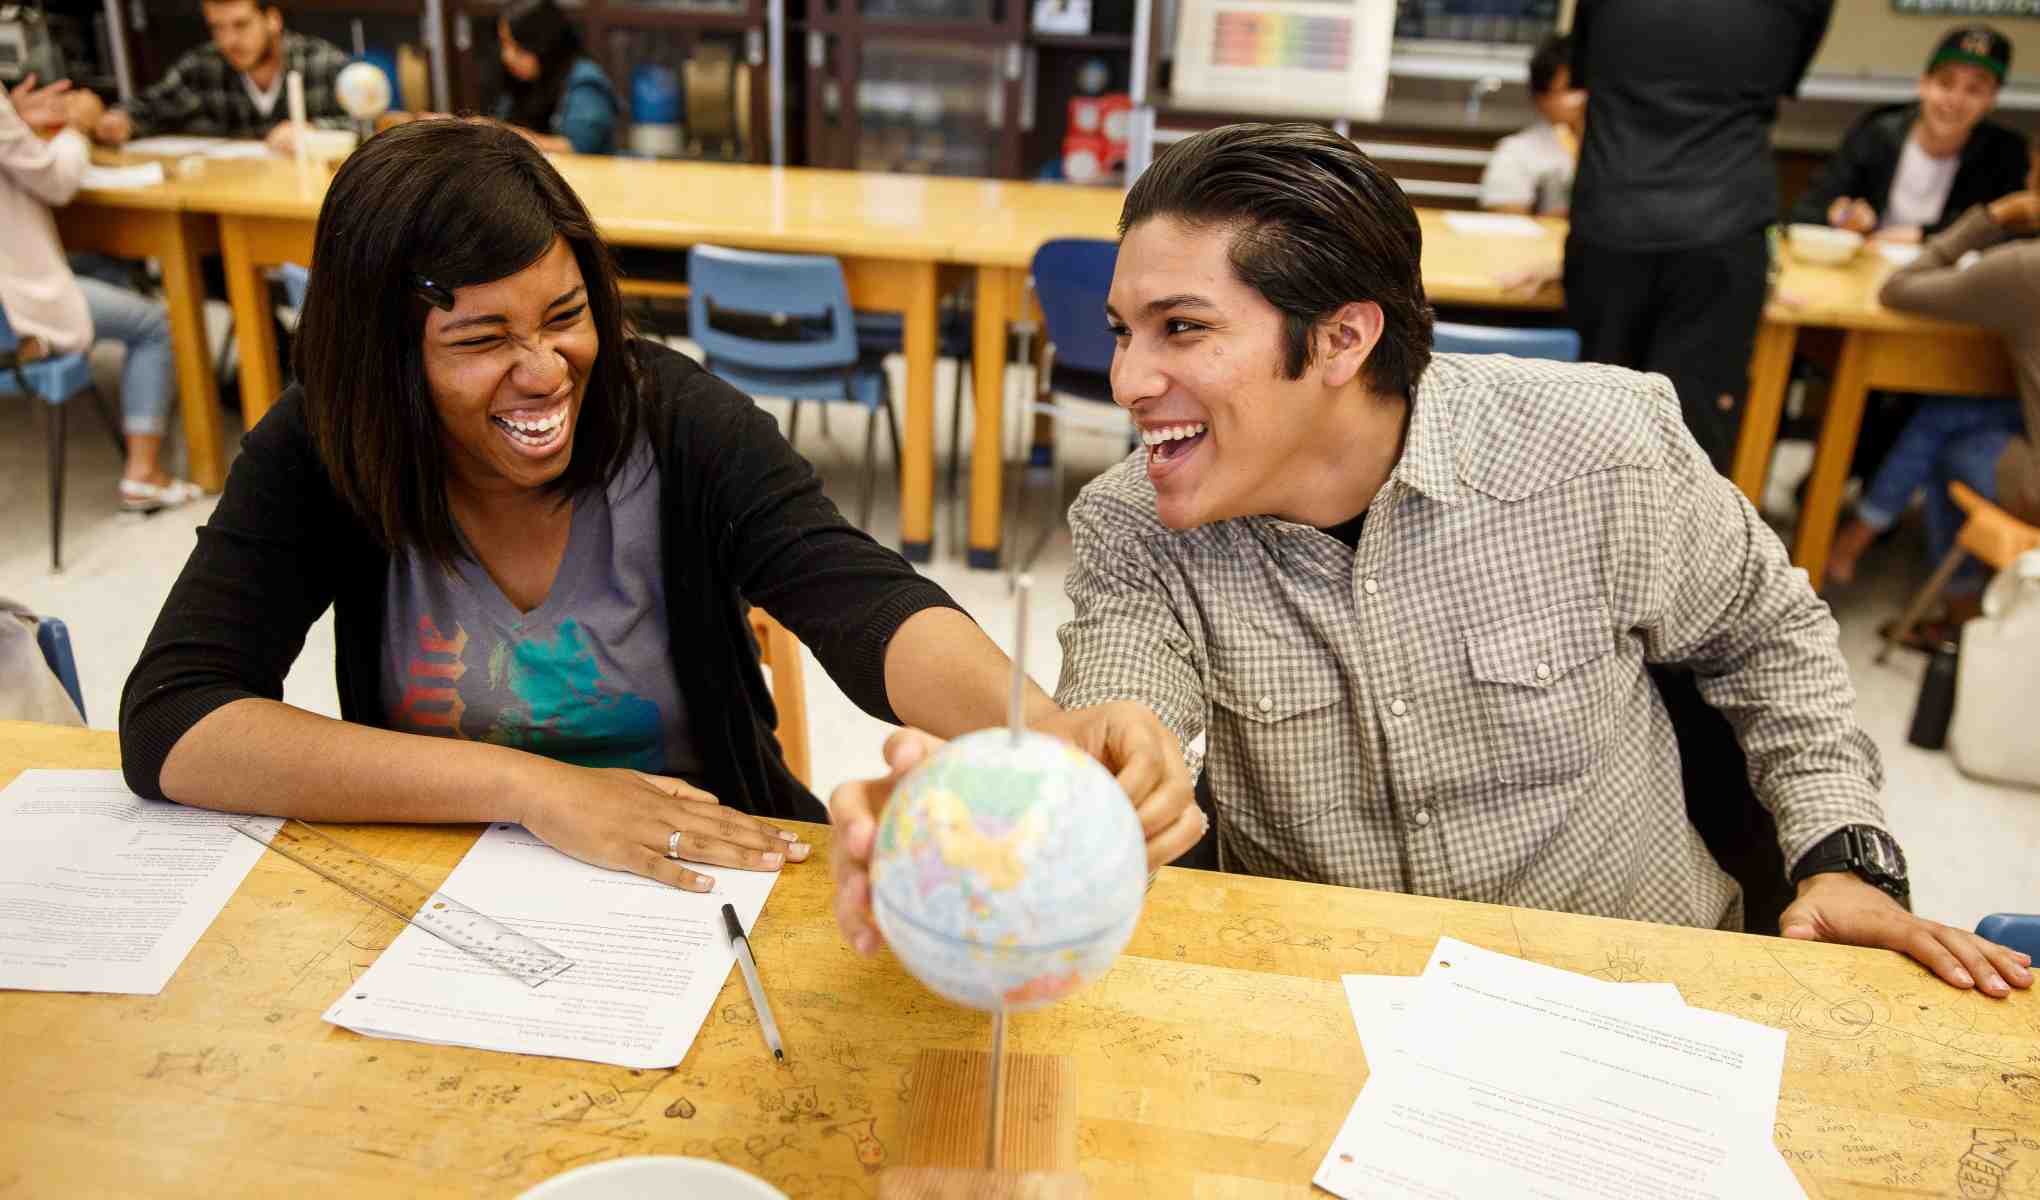 Two students at SF State are laughing and looking at a globe of the world in a classroom.